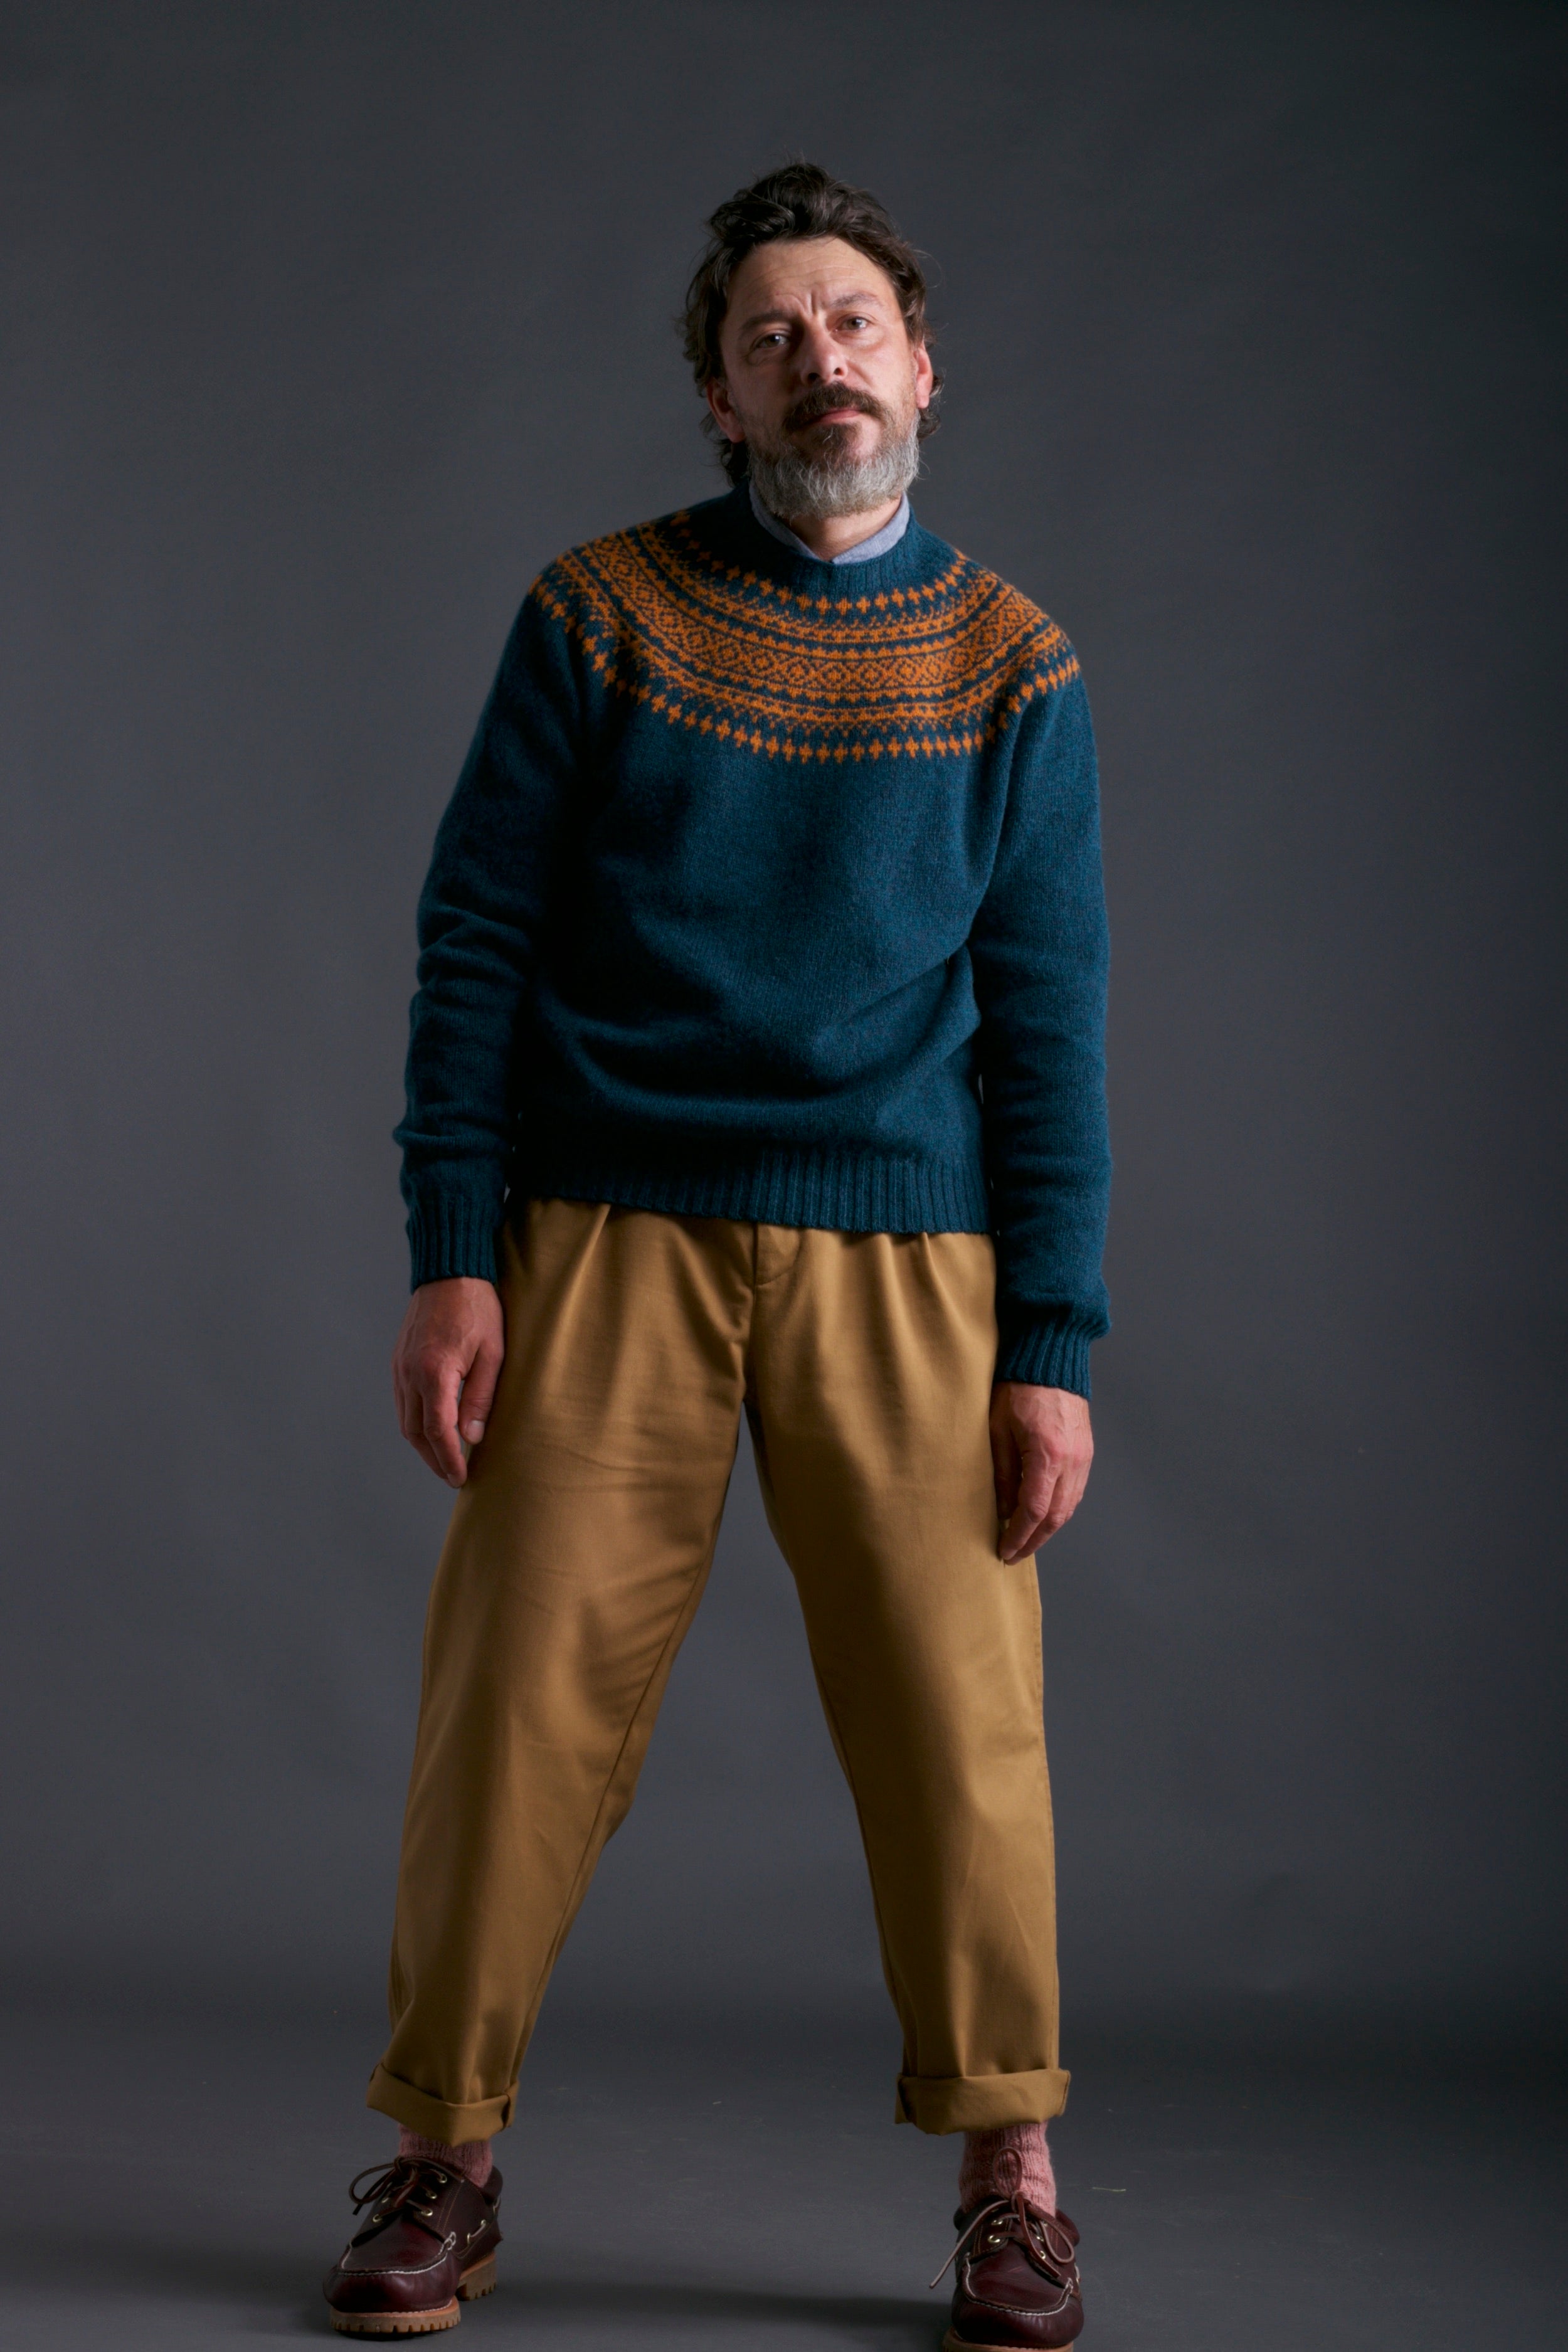 Man wears Carrier Company Shetland Yoke Jumper in ginger and Teal with Mens Work Trouser in Tan